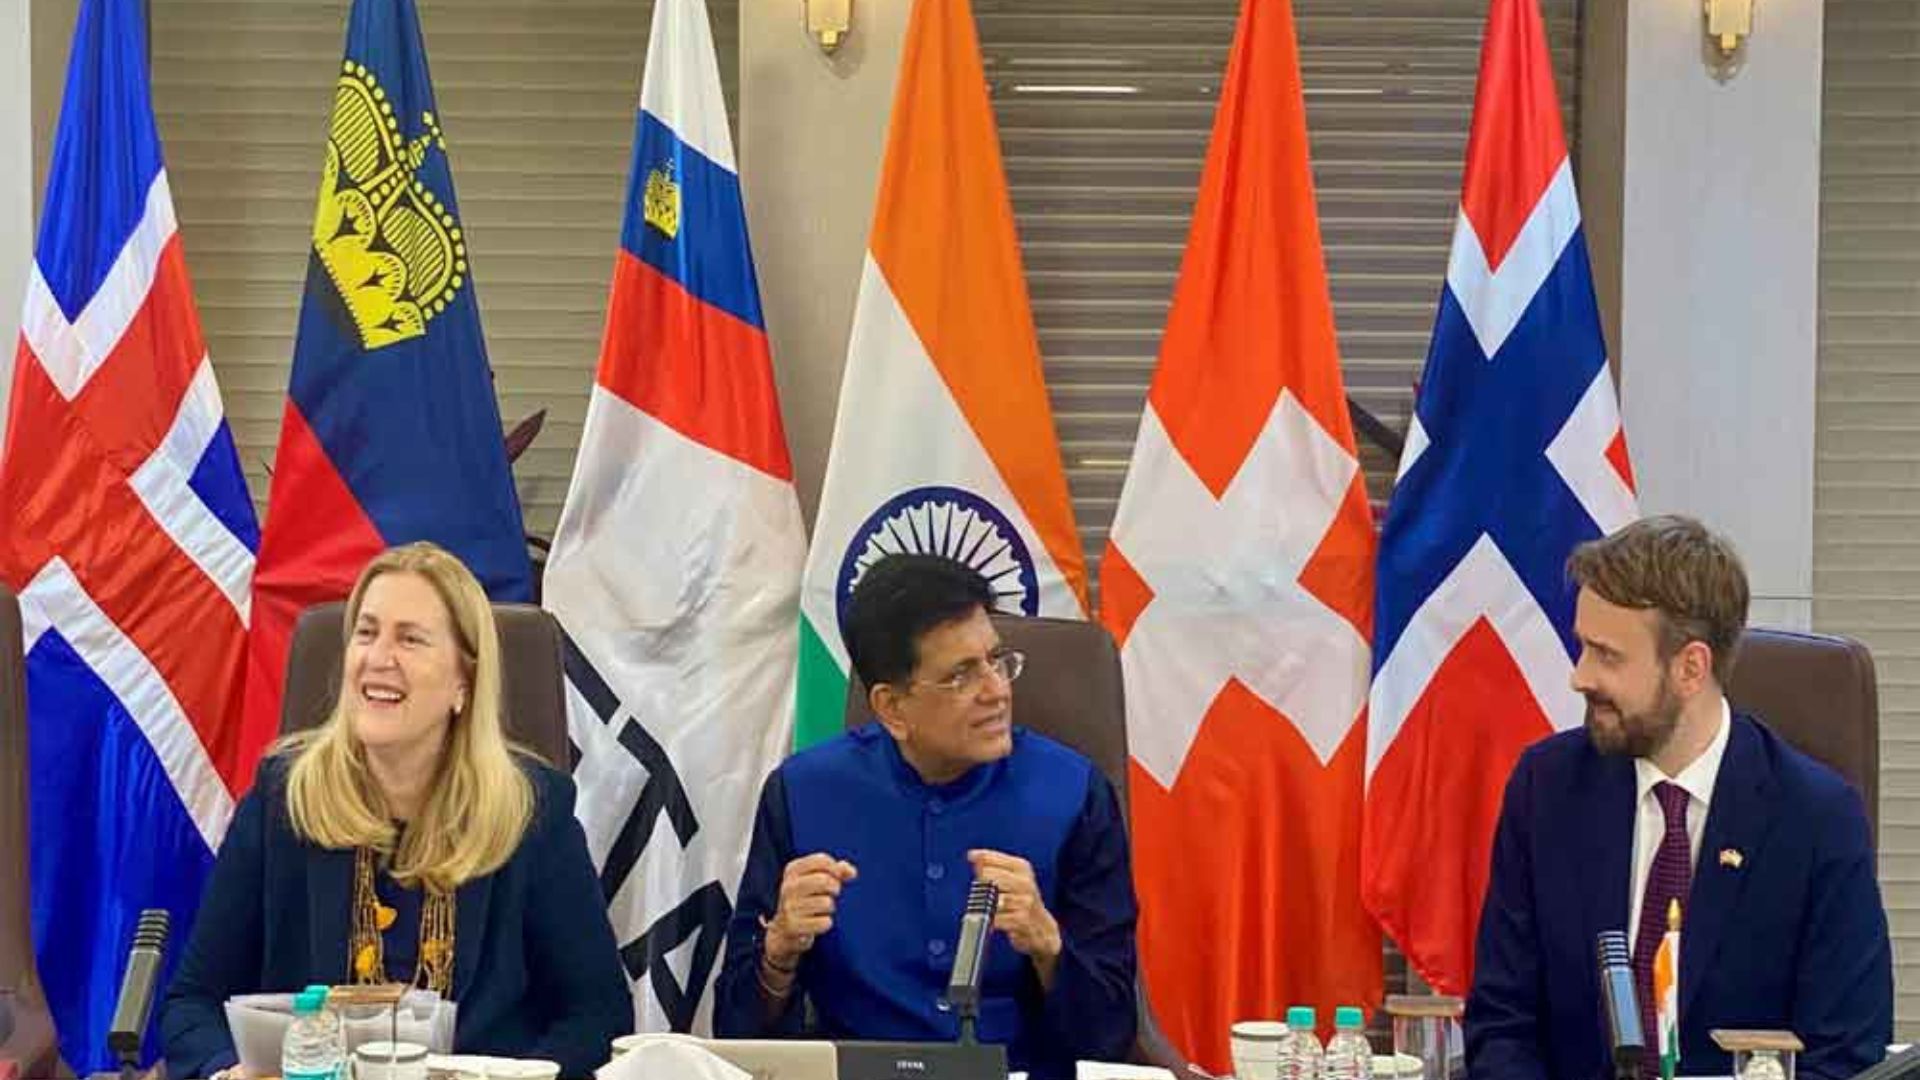 India signs free trade agreement with European Free Trade Association